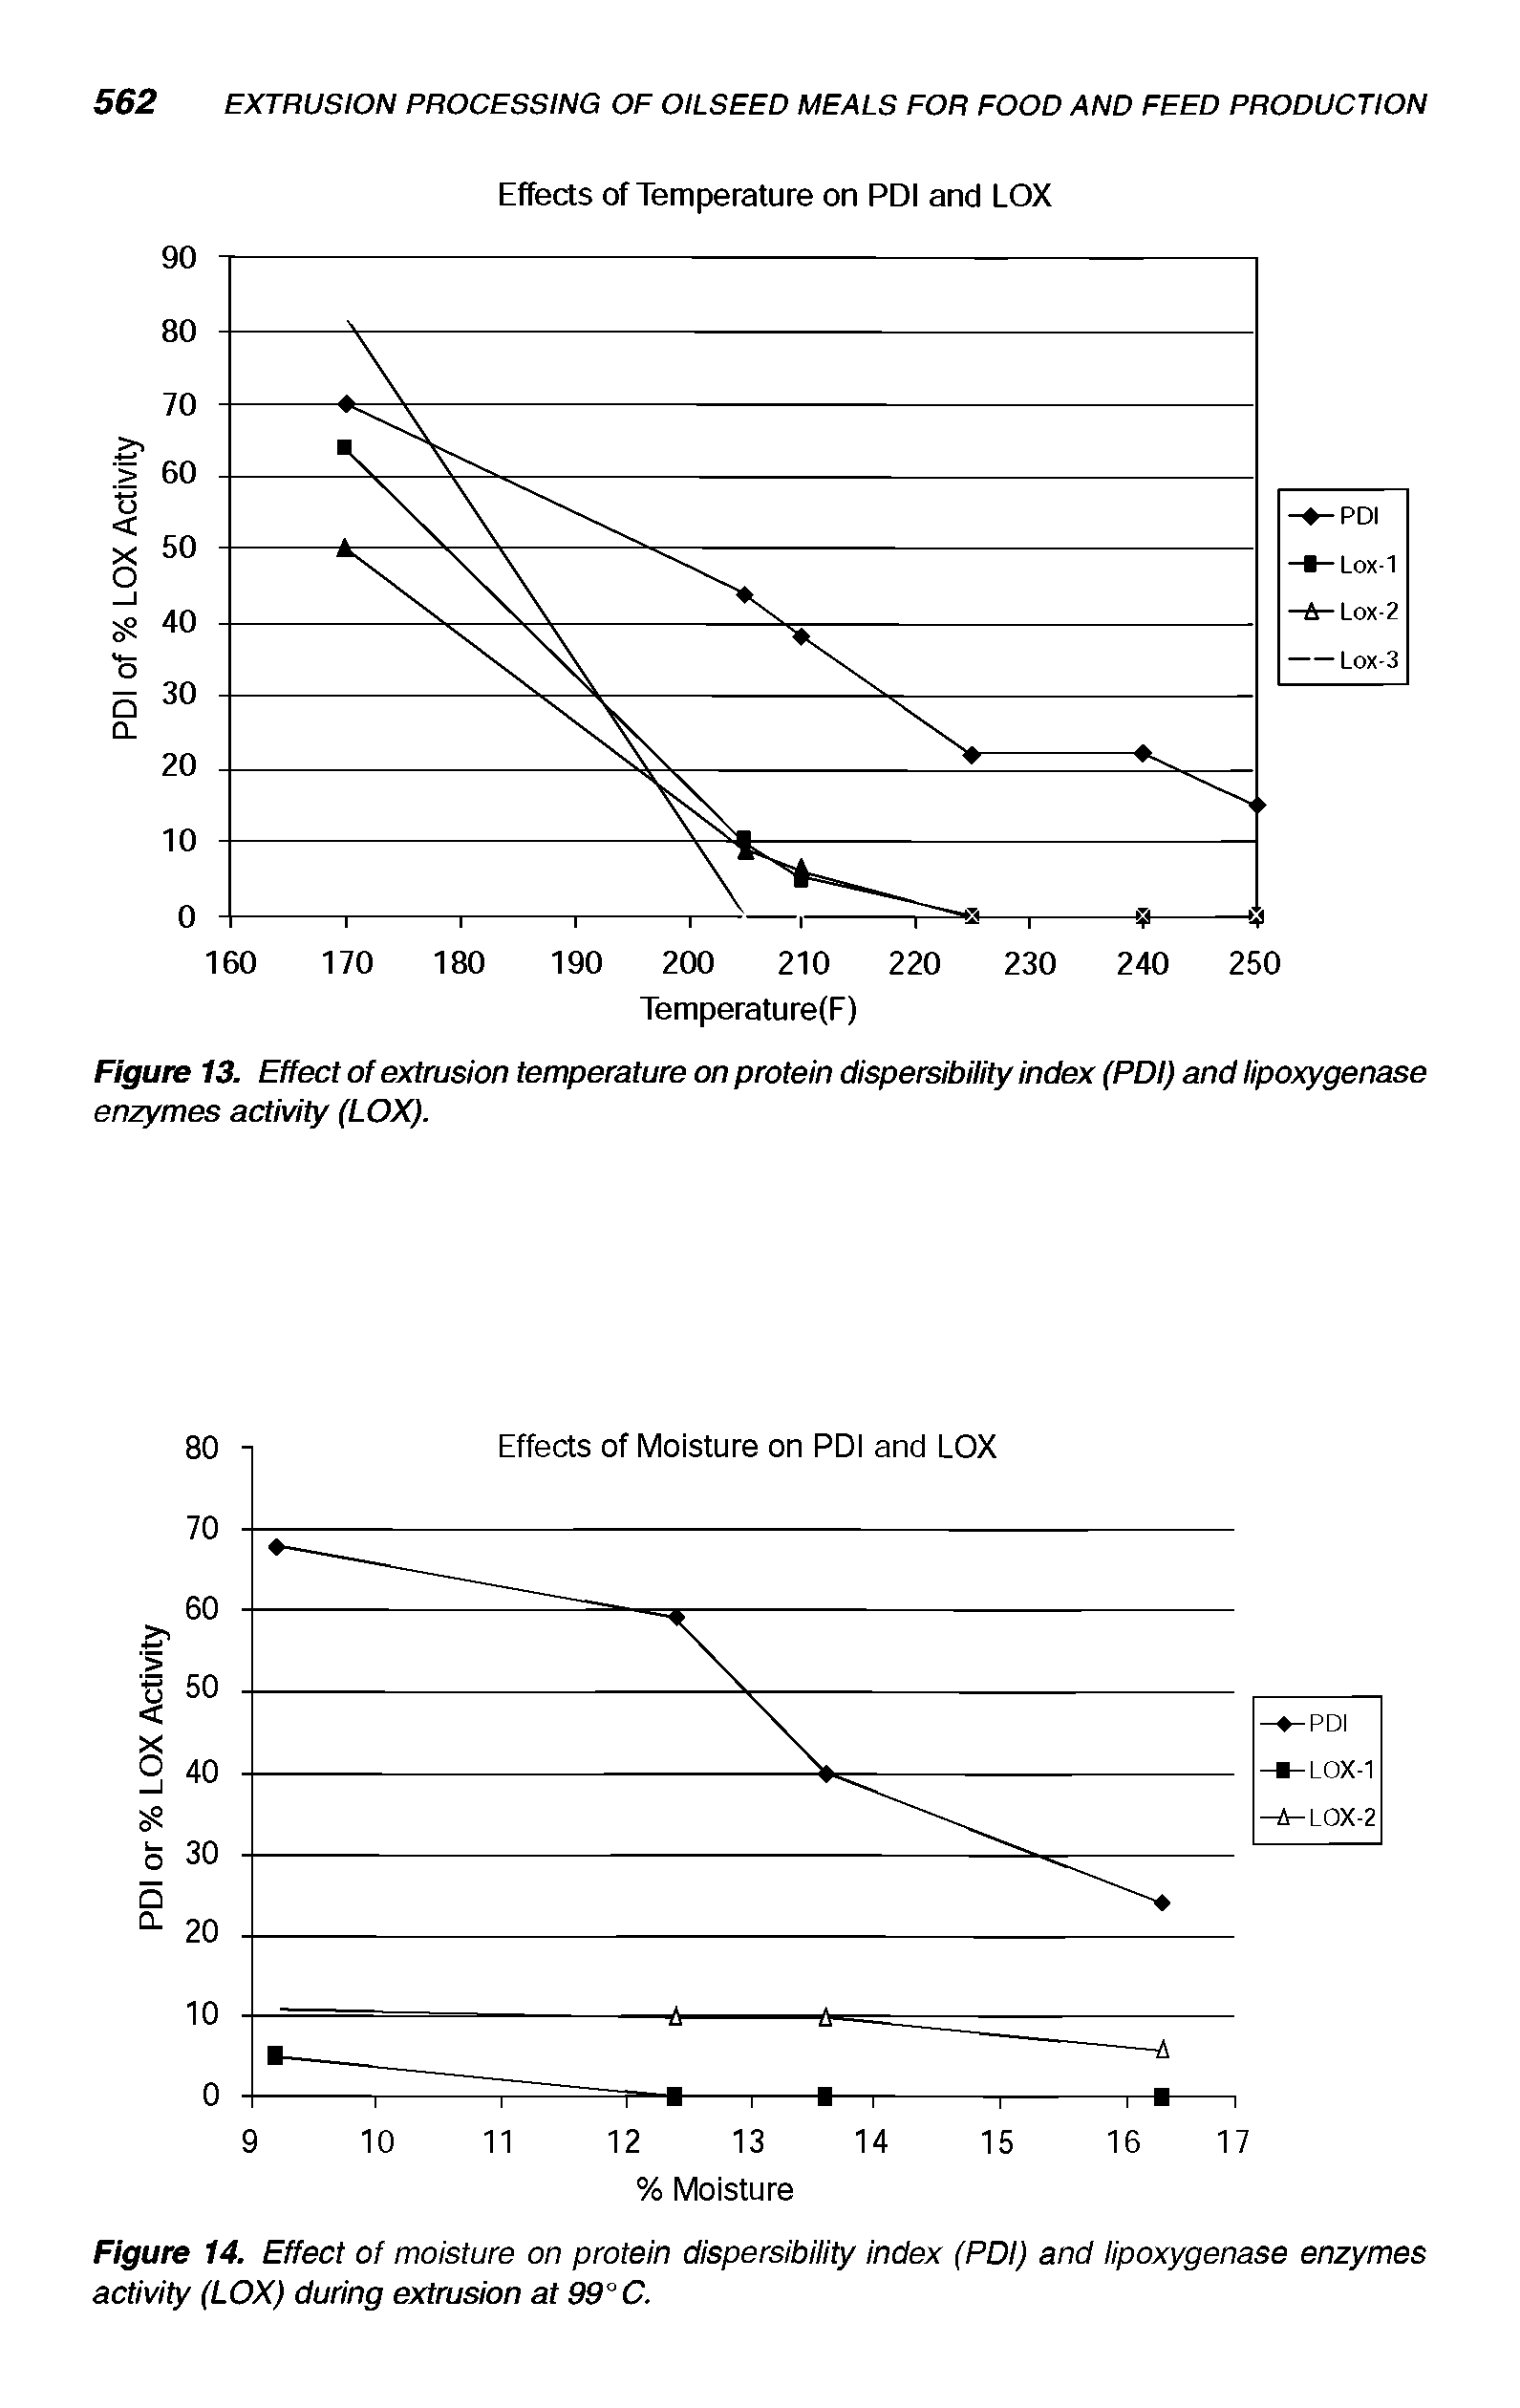 Figure 13. Effect of extrusion temperature on protein dispersibility index (PDI) and lipoxygenase enzymes activity (LOX).